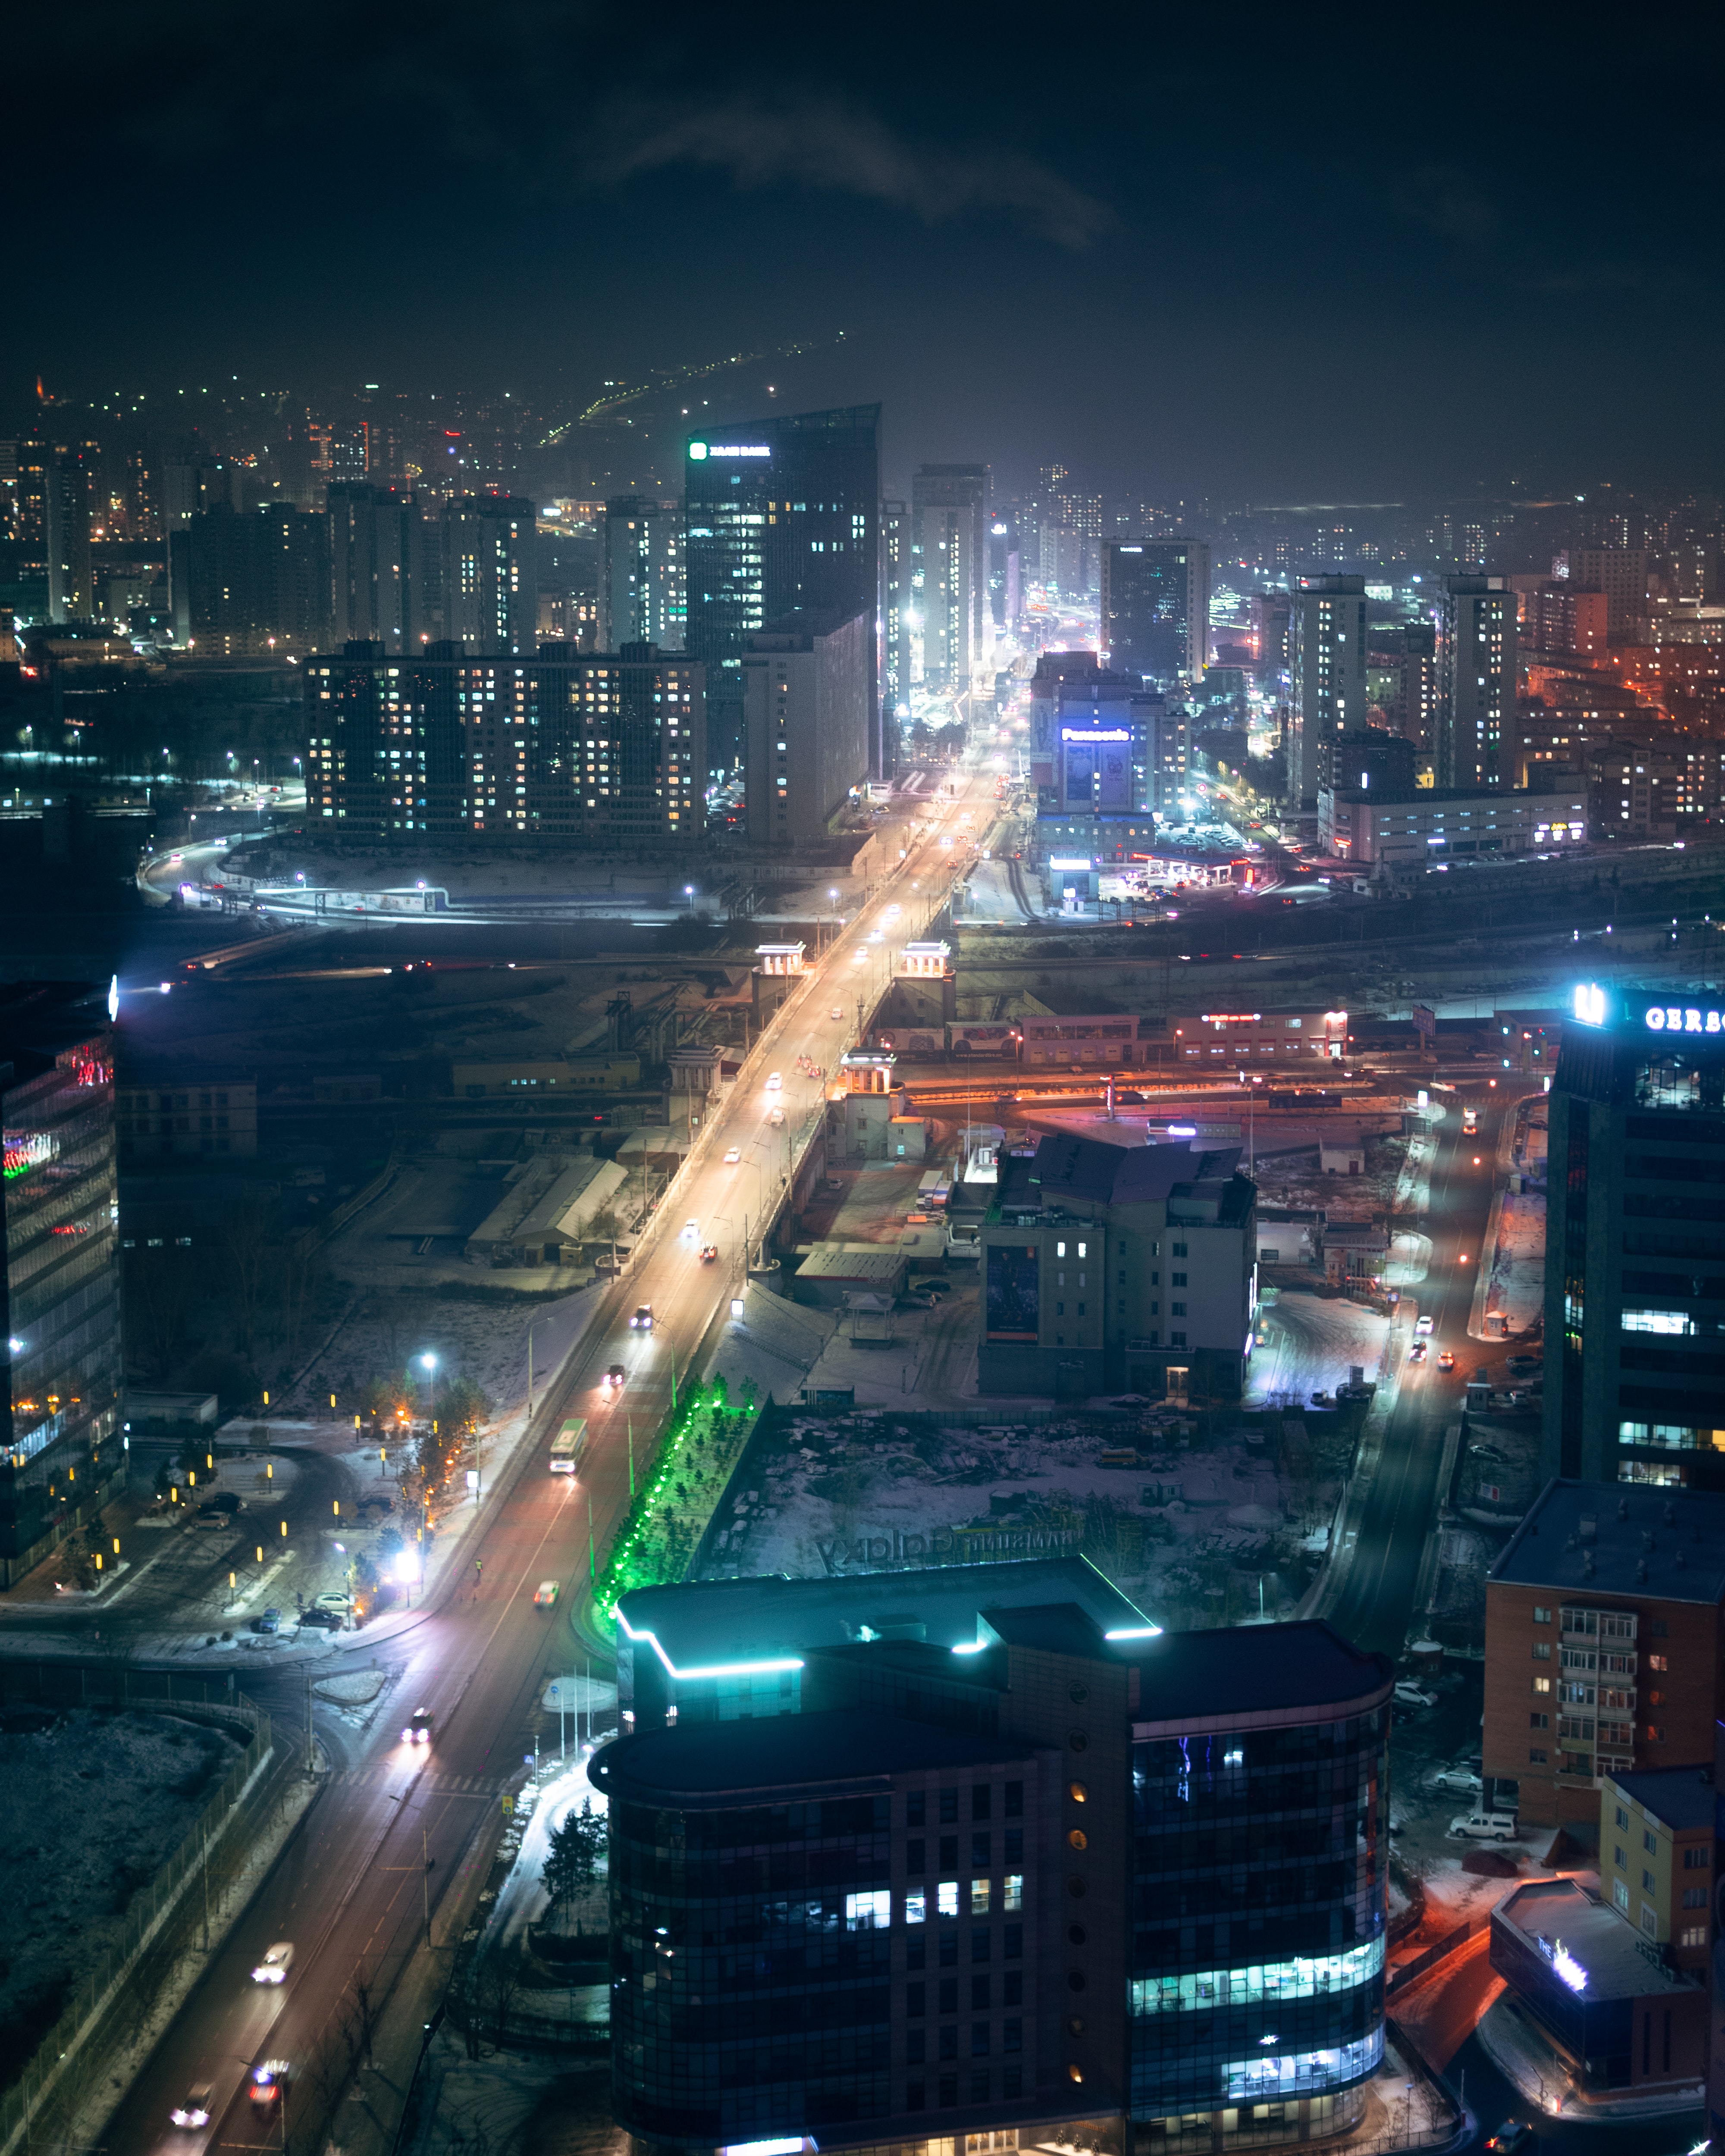 lights, roads, building, cities, streets, view from above, night city High Definition image